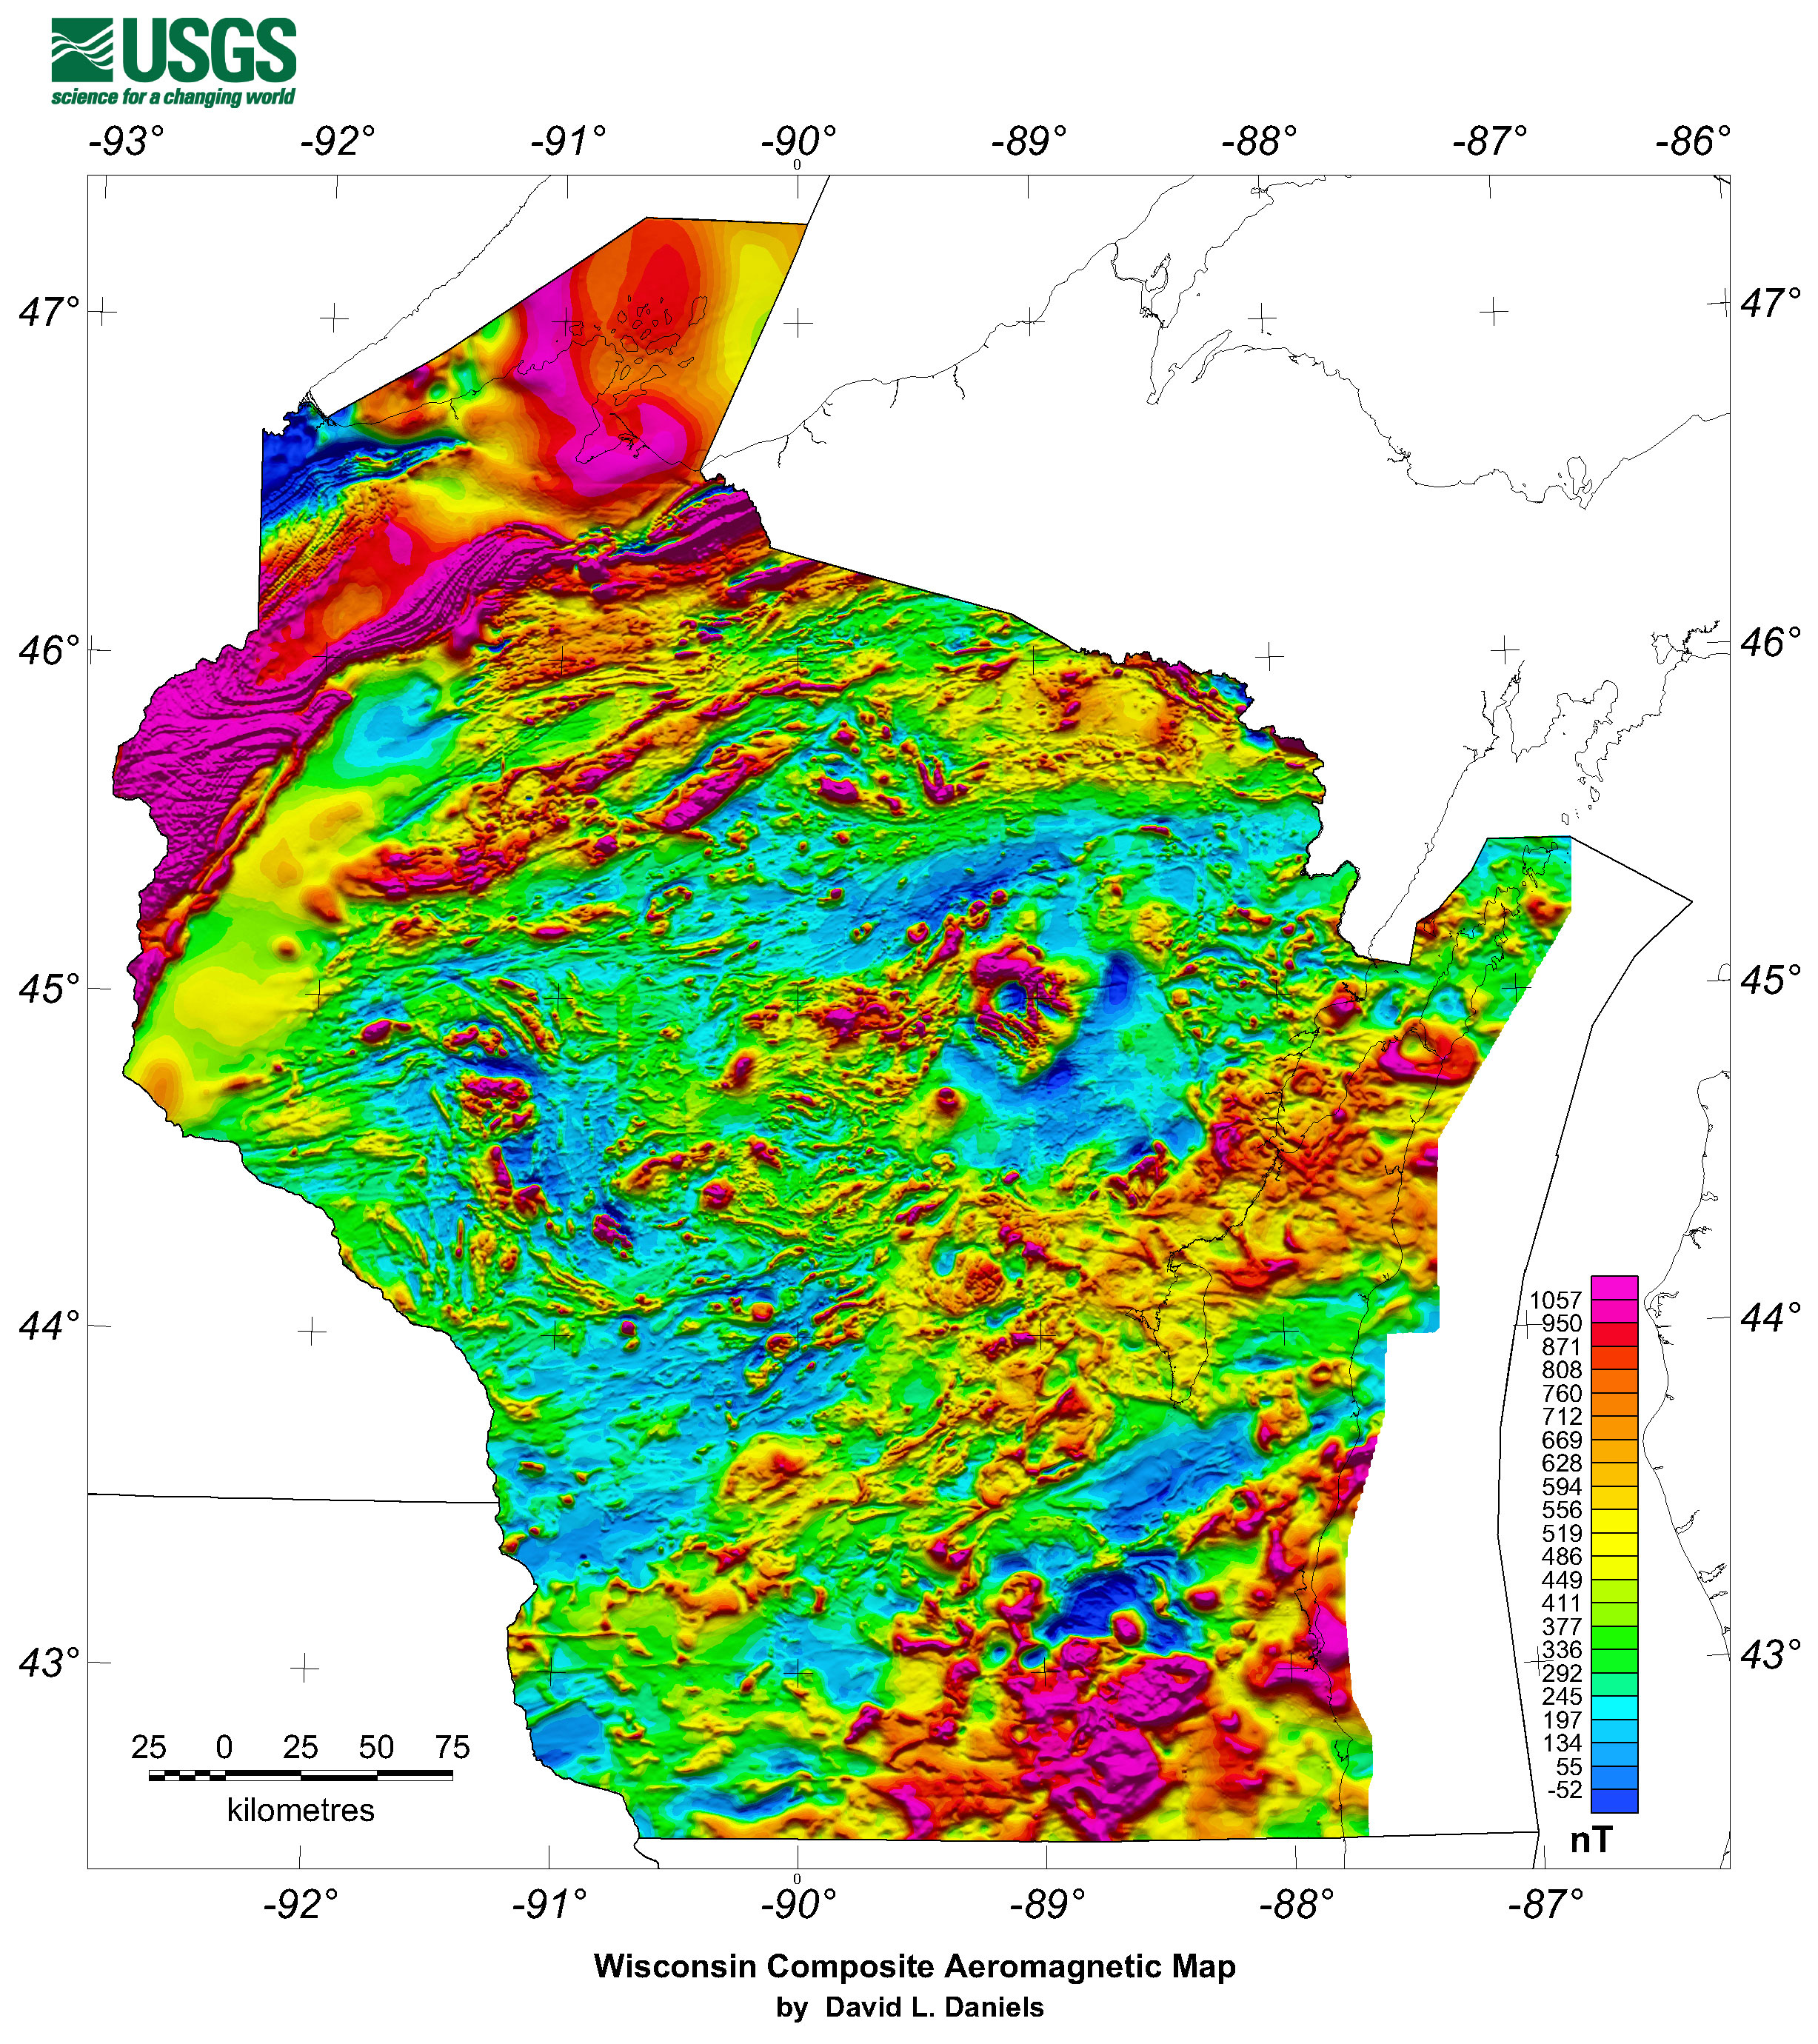 Wisconsin Composite Aeromagnetic Map Hi-res Image